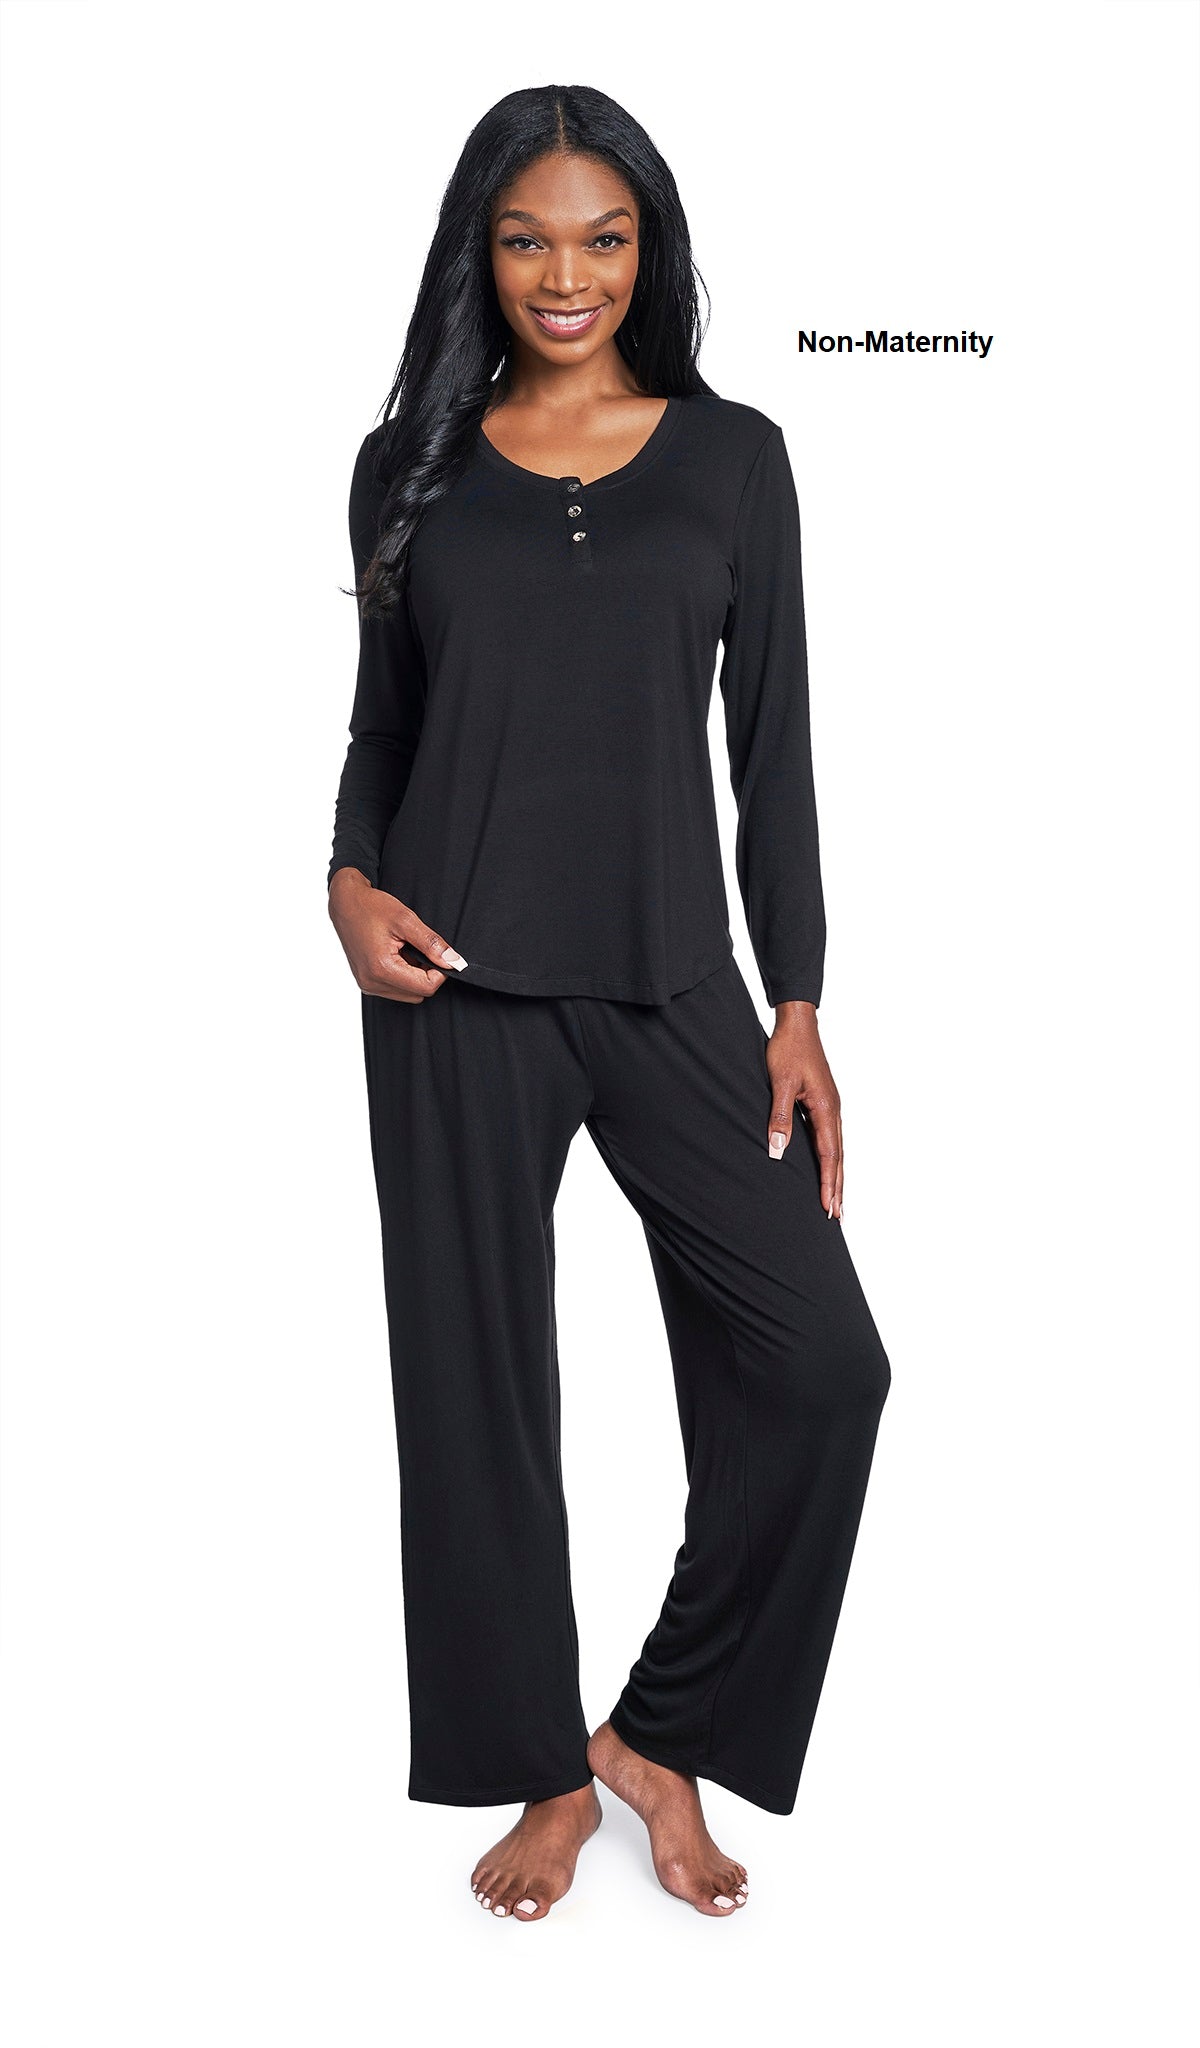 Black Laina 2-Piece Set. Woman wearing button front placket long sleeve top and pant as non-maternity with one hand holding hem of shirt.